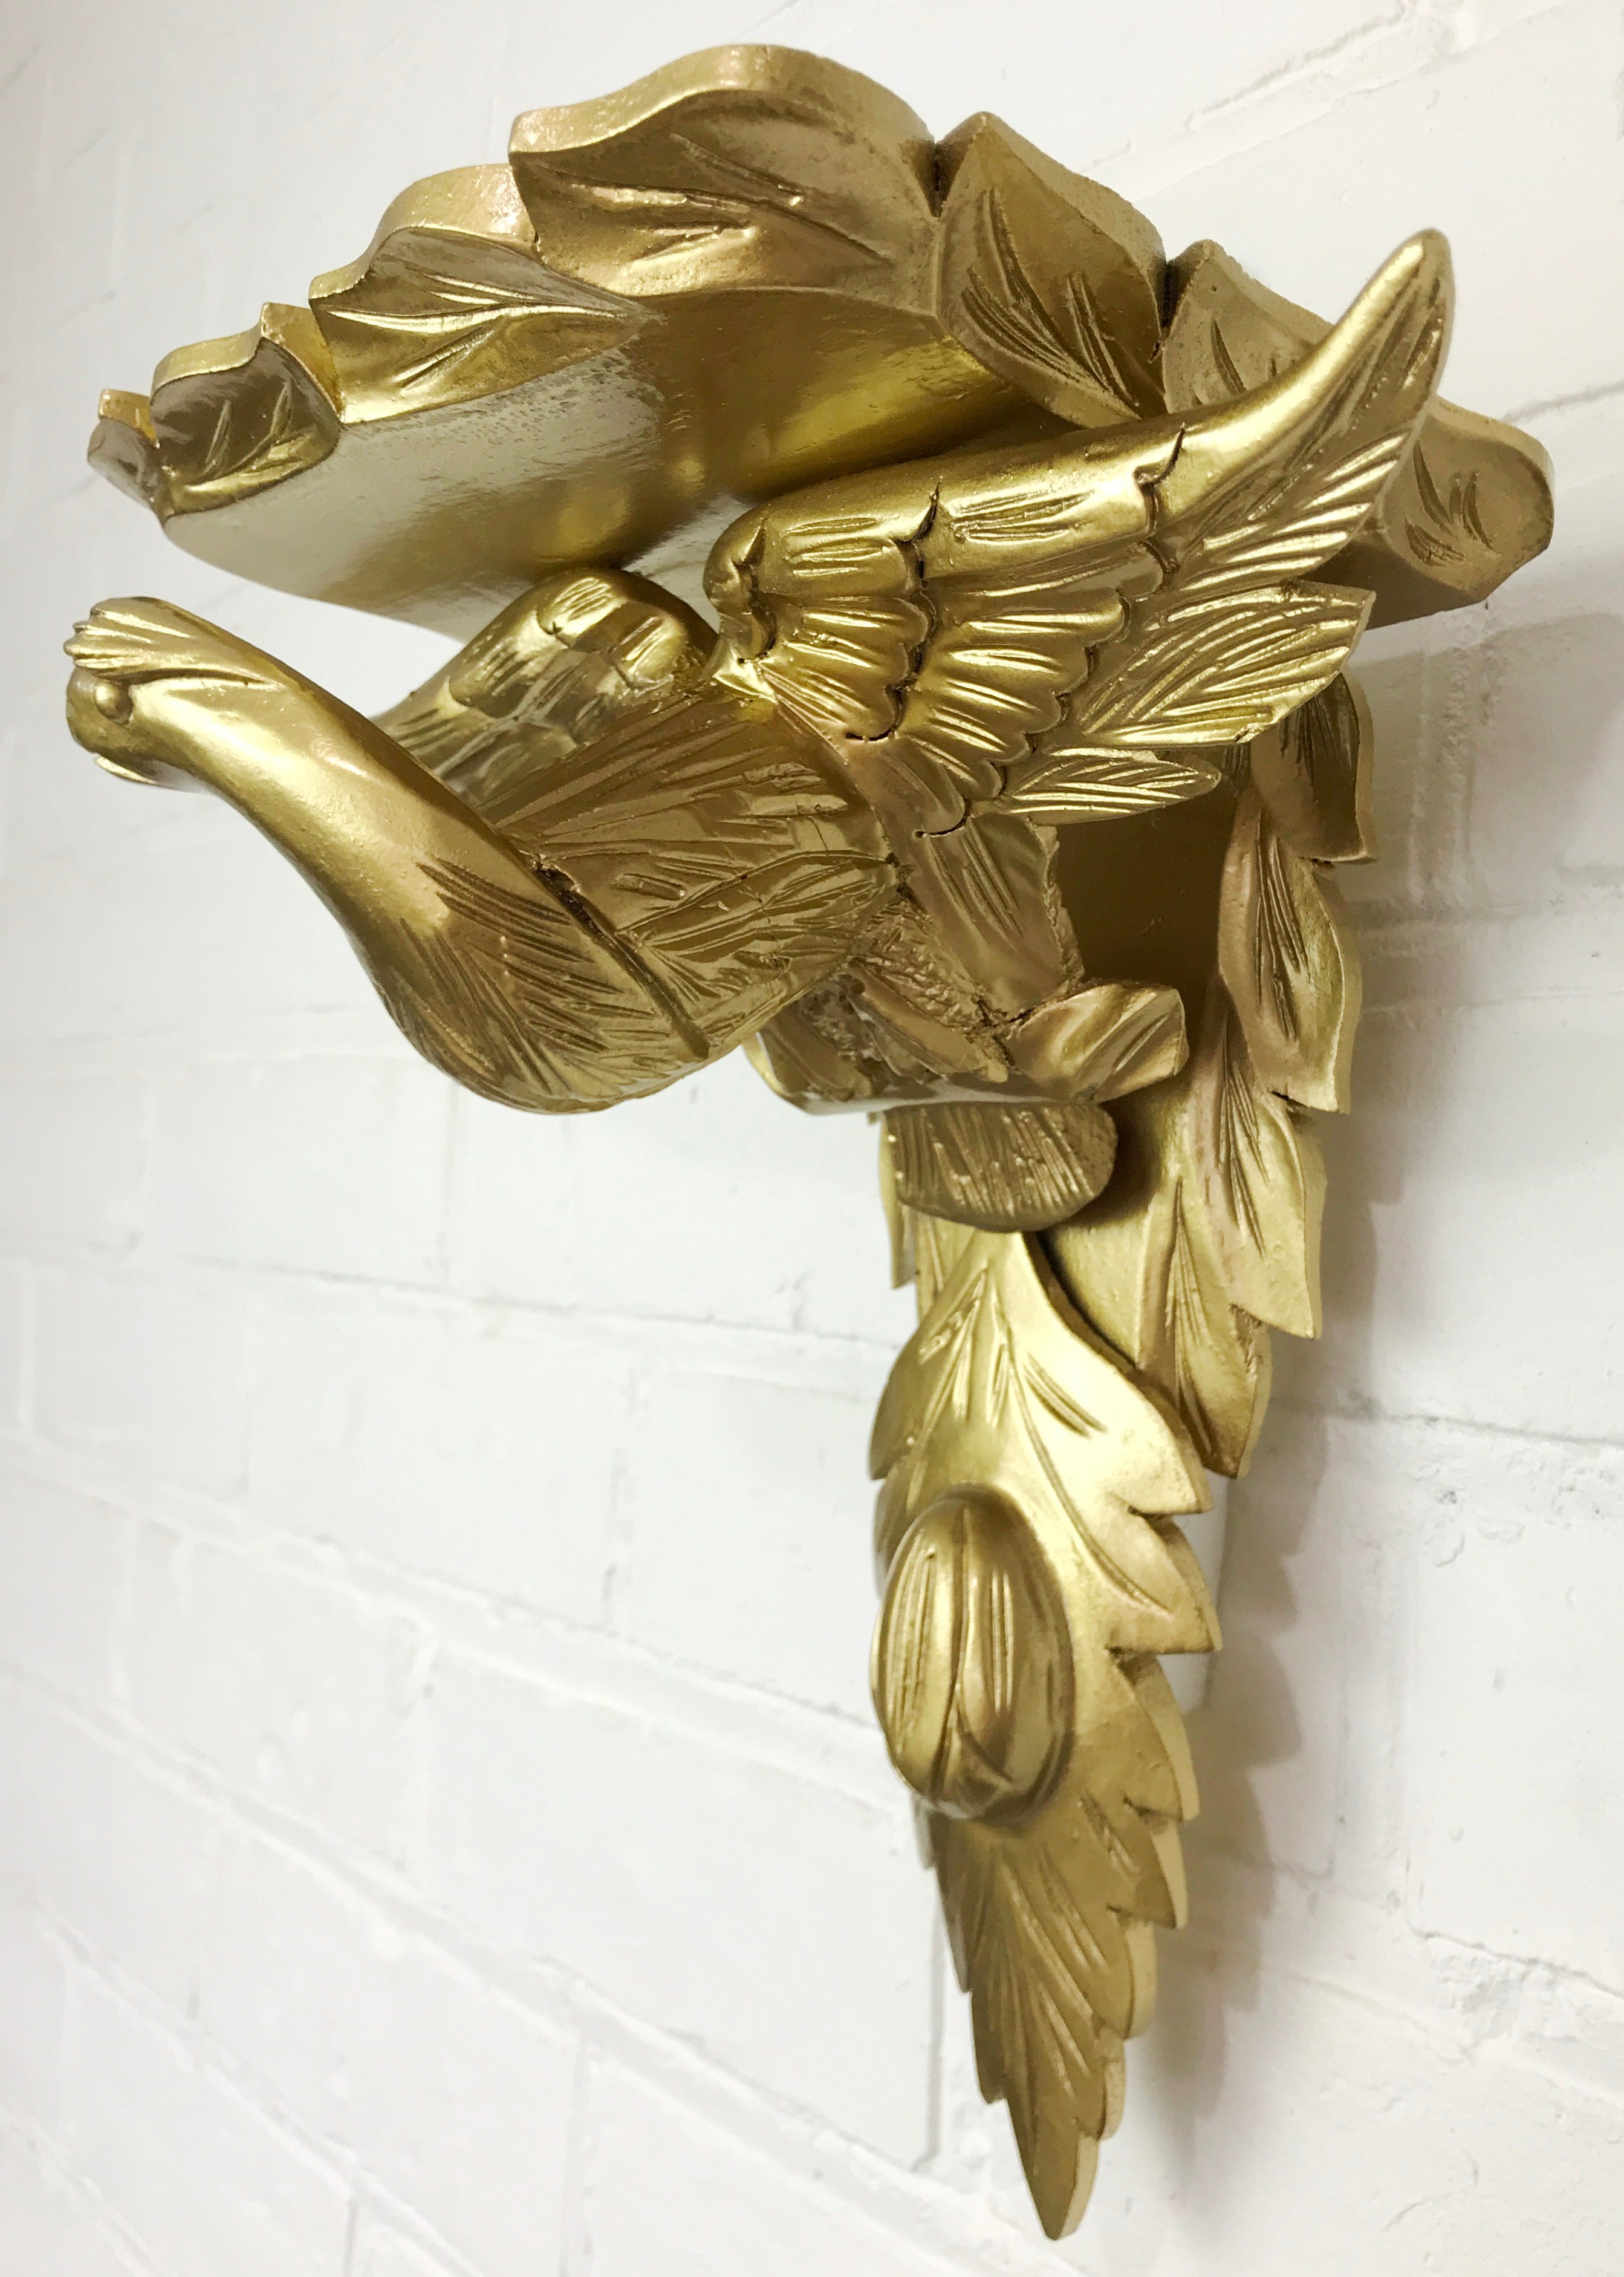 Wood Carved Eagle Wall Sconce | eXibit collection